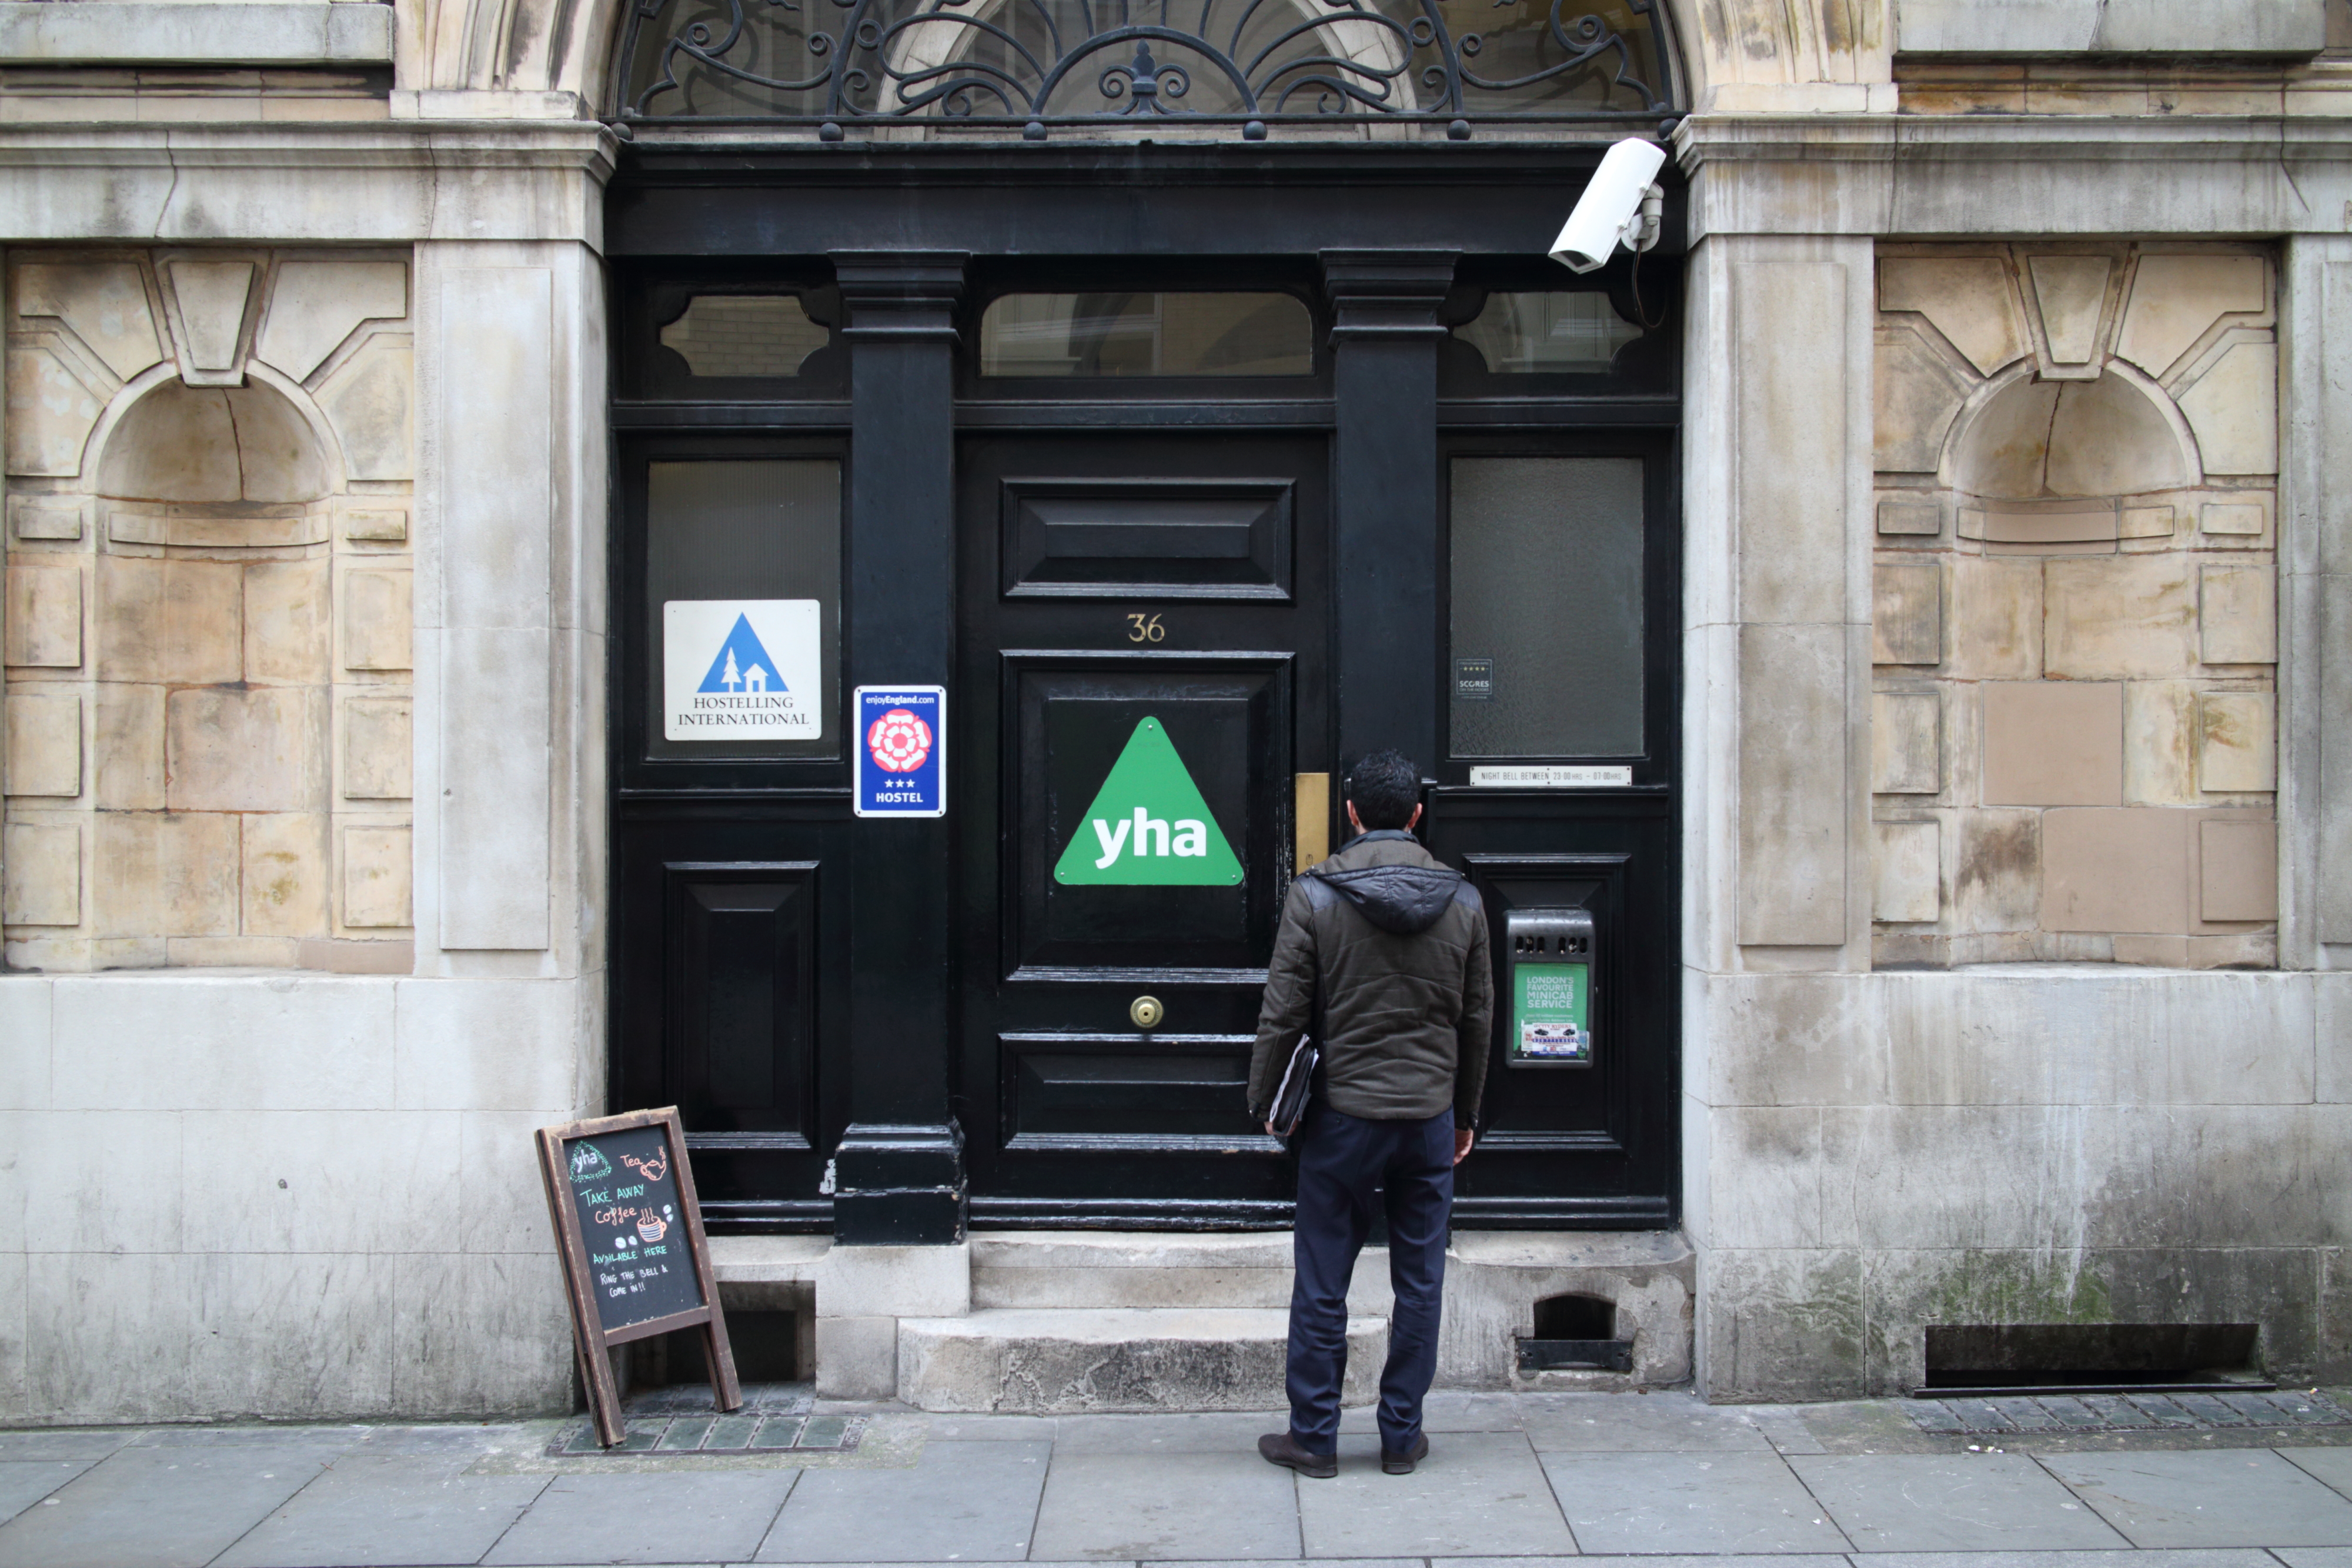 London, United Kingdom - March 17, 2015: A man at the entrance of the St Pauls Youth Hostel in London, England. The Youth Hostel Association provides accommodation in 200 locations in England and Wales